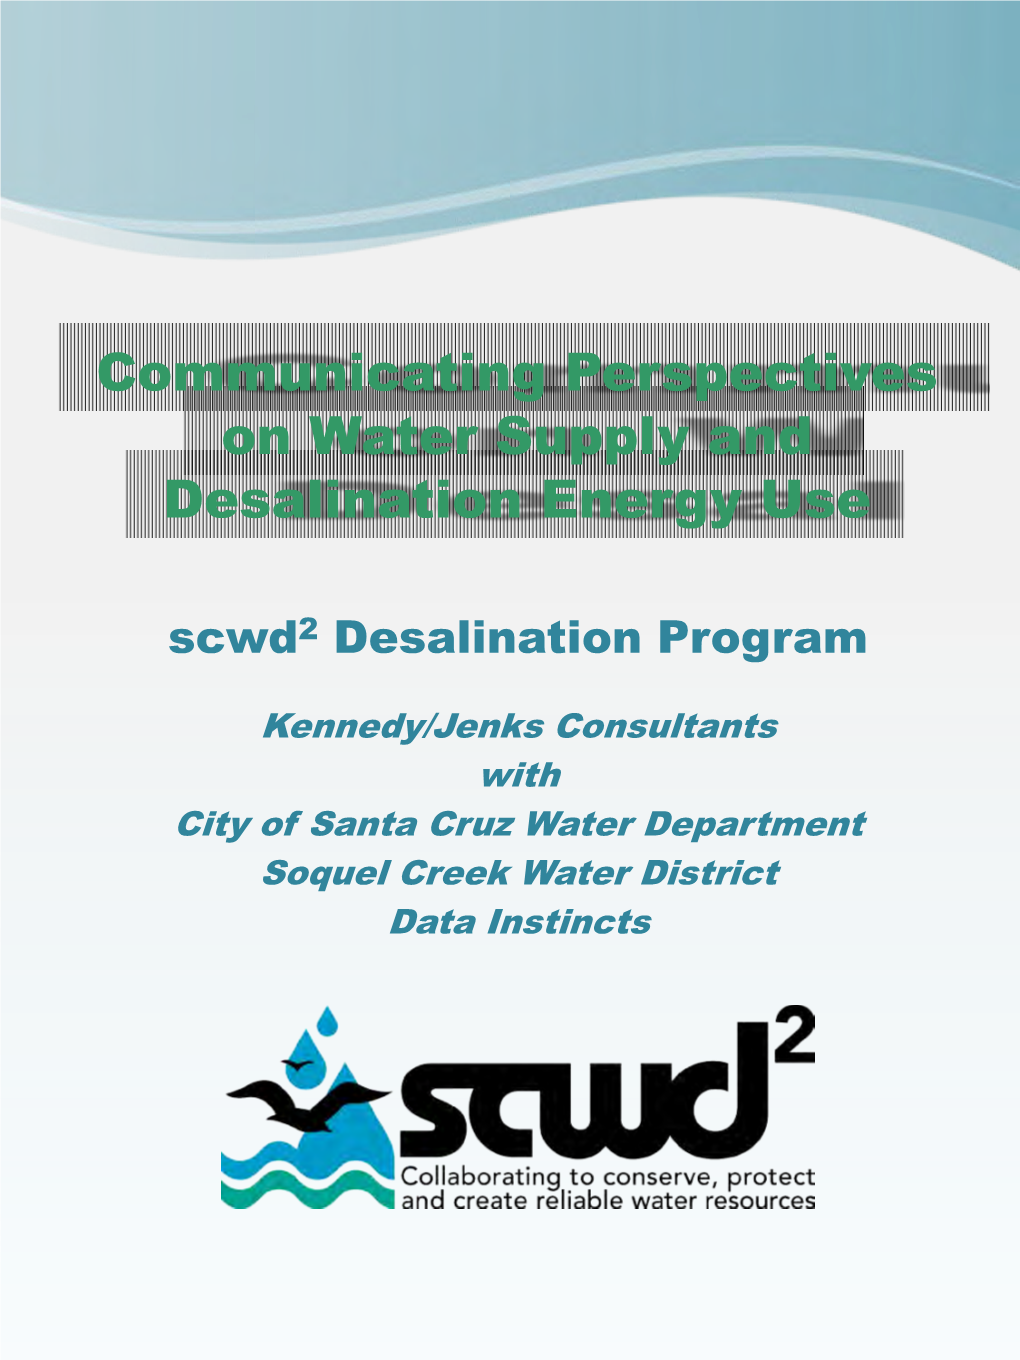 Communicating Perspectives on Water Supply and Desalination Energy Use